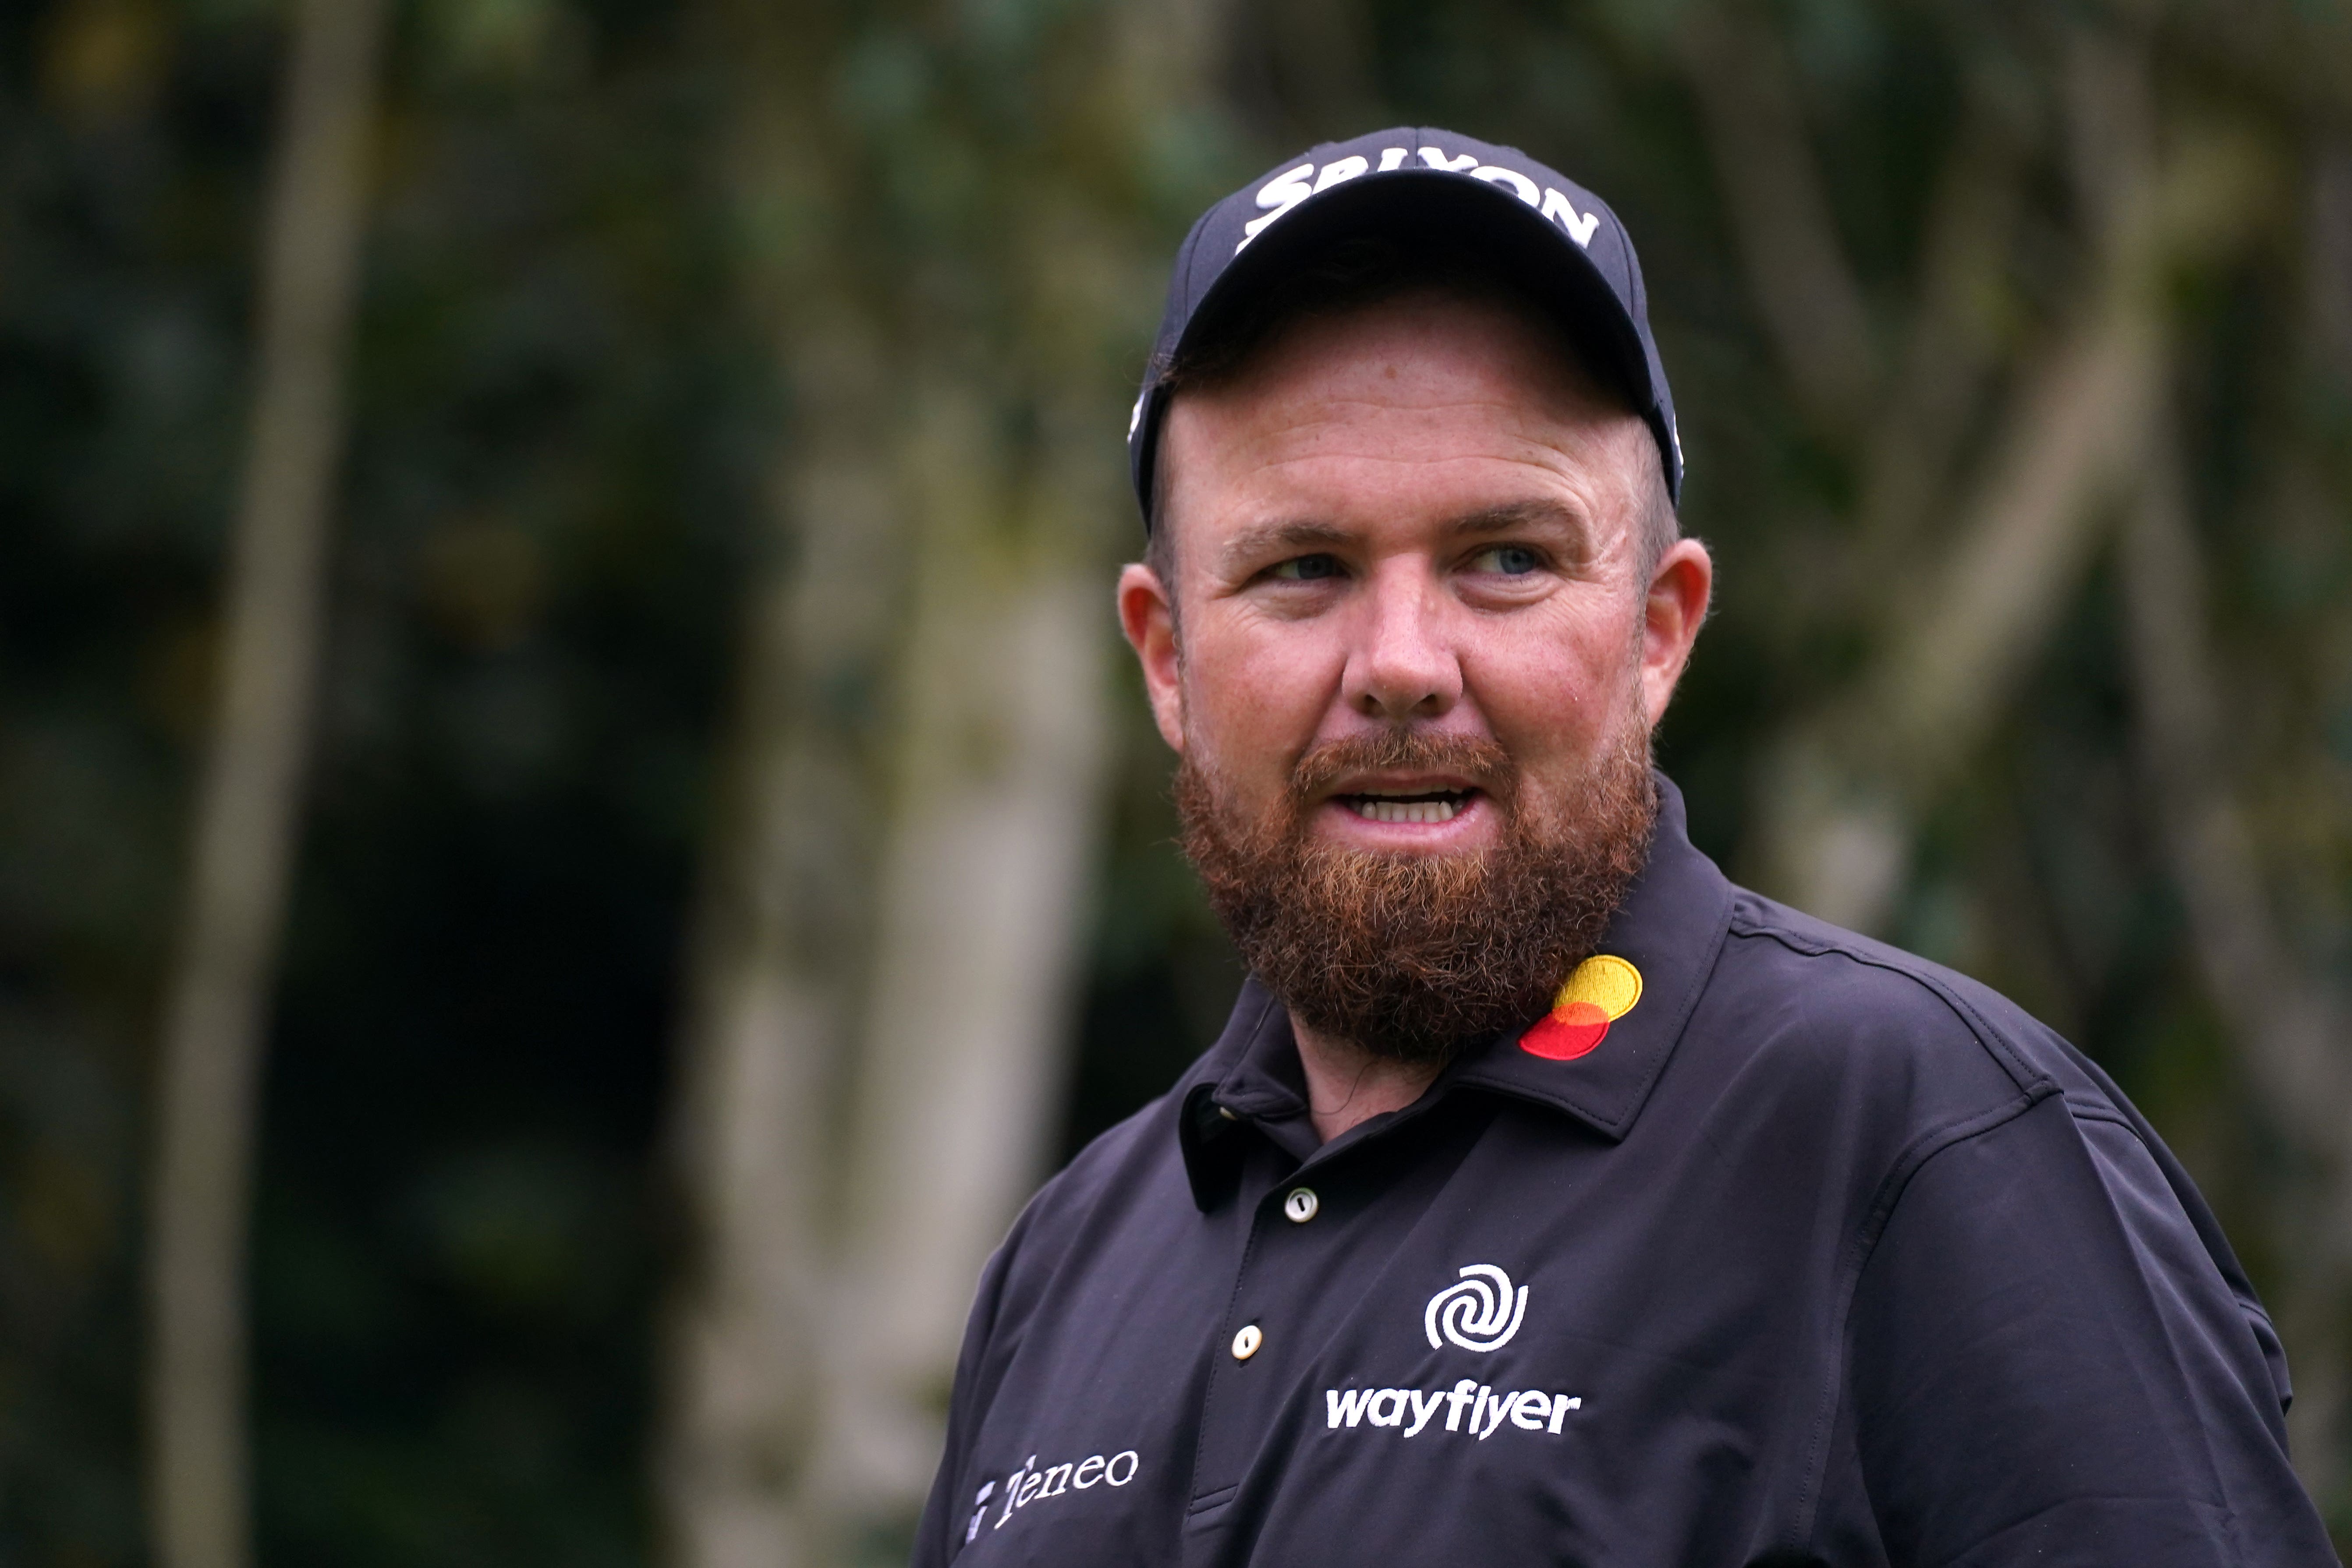 Shane Lowry says he deserved place on Ryder Cup team after wild card criticism The Independent